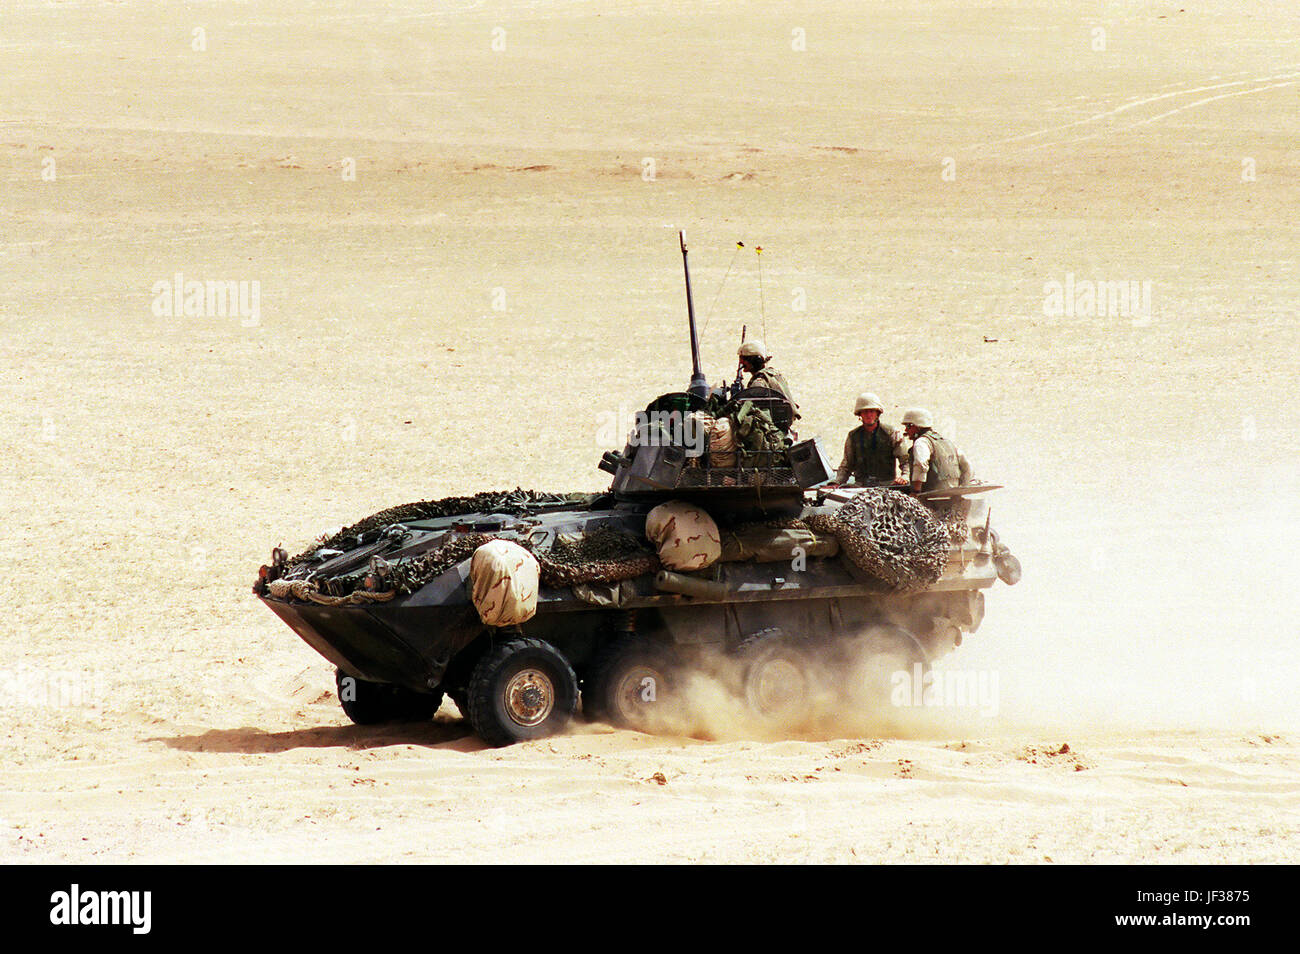 000408-D-9880W-156 A U.S. Marine Corps Light Armored Vehicle (LAV-25) maneuvers off the range at the conclusion of a live-fire training exercise at the Udairi Training Range in northern Kuwait on April 8, 2000.  The LAV-25 is an all-terrain, all-weather vehicle with night capabilities and is armed with a turret-mounted 25 mm chain gun, and a 7.62 mm machine gun.  The vehicle is capable of transporting six Marines inside the hull.  The LAV is attached to the 1st Light Armored Reconnaissance Battalion, 15th Marine Expeditionary Unit.  DoD photo by R. D. Ward.  (Released) Stock Photo